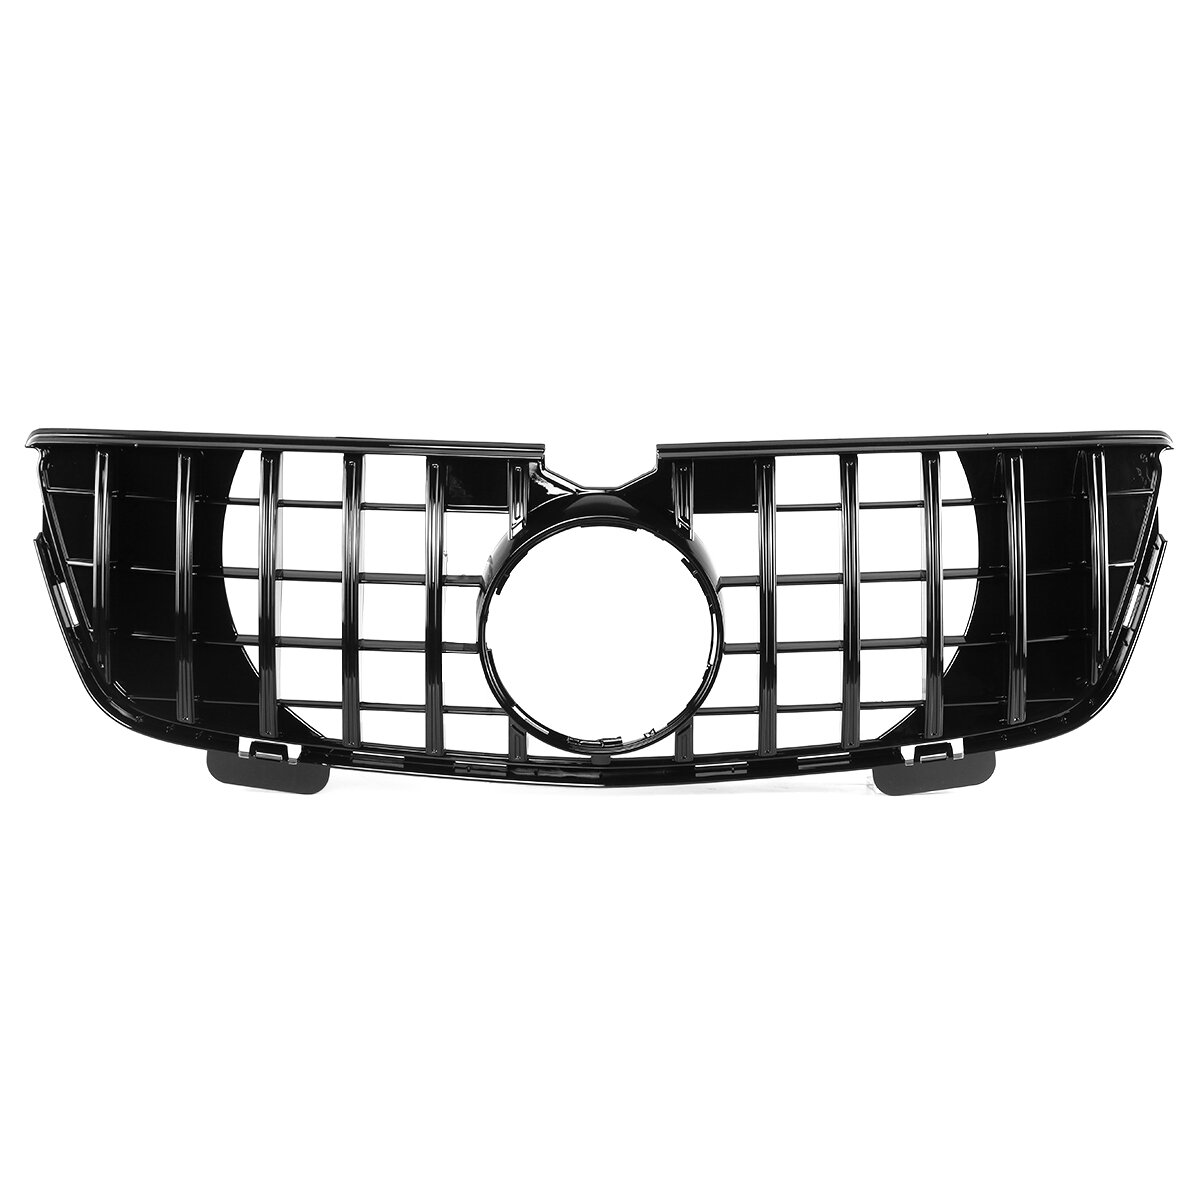 

GTR Style Front Grill Grille Glossy Black For Mercedes-Benz GL-Class X164 GL320 GL450 GL350 2007-2012